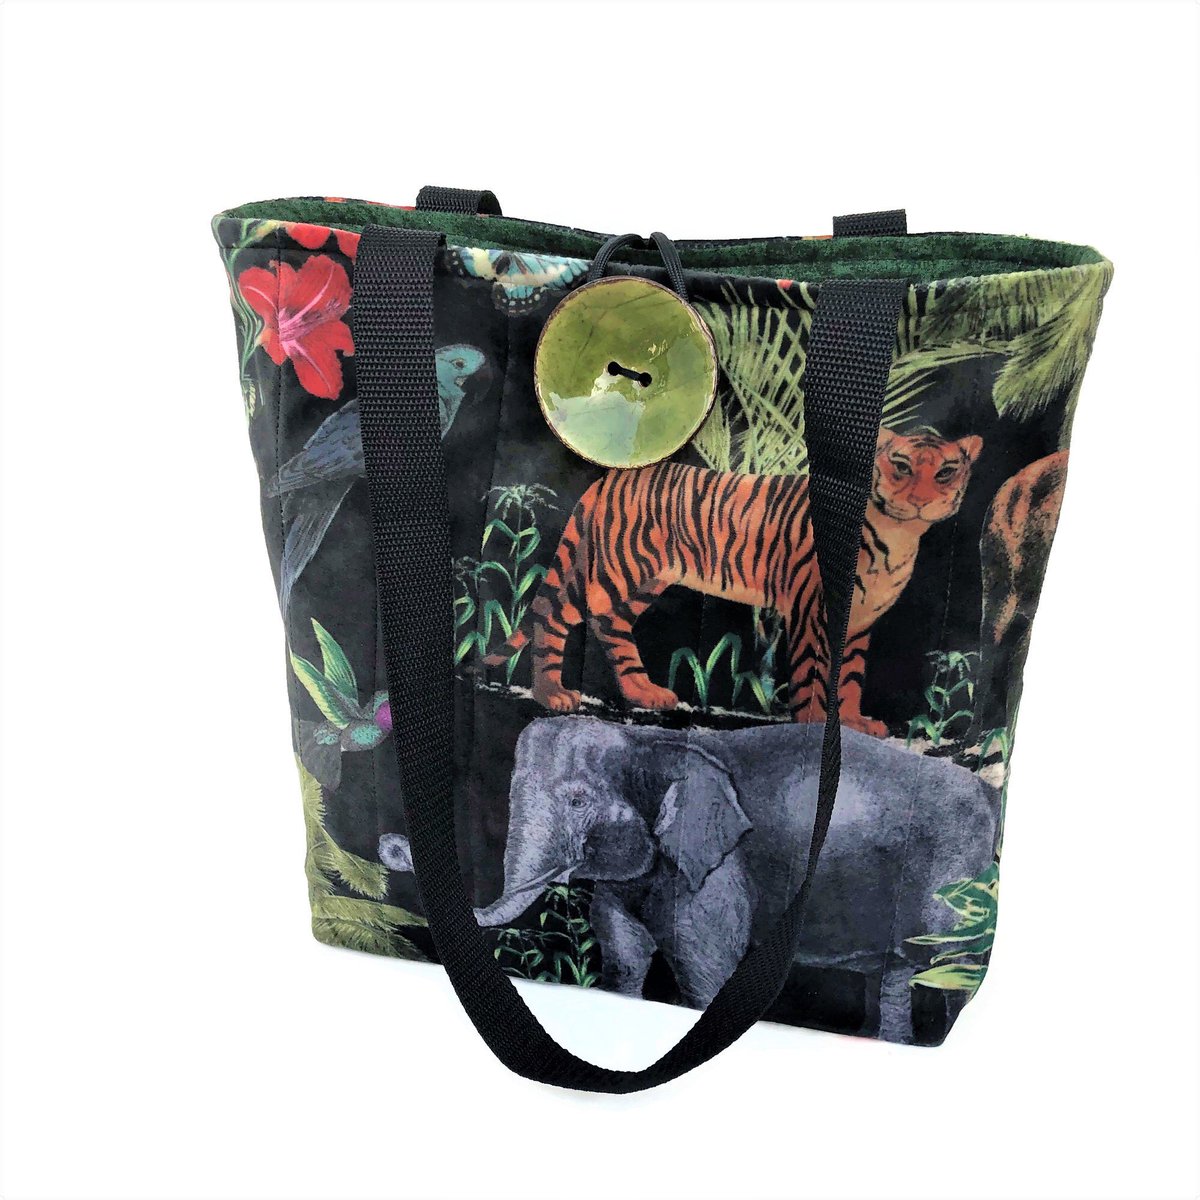 Excited to share this item from my #etsy shop: #giftfirher #veganbags #tiger #elephant #vegan suede  etsy.me/2LYISsT